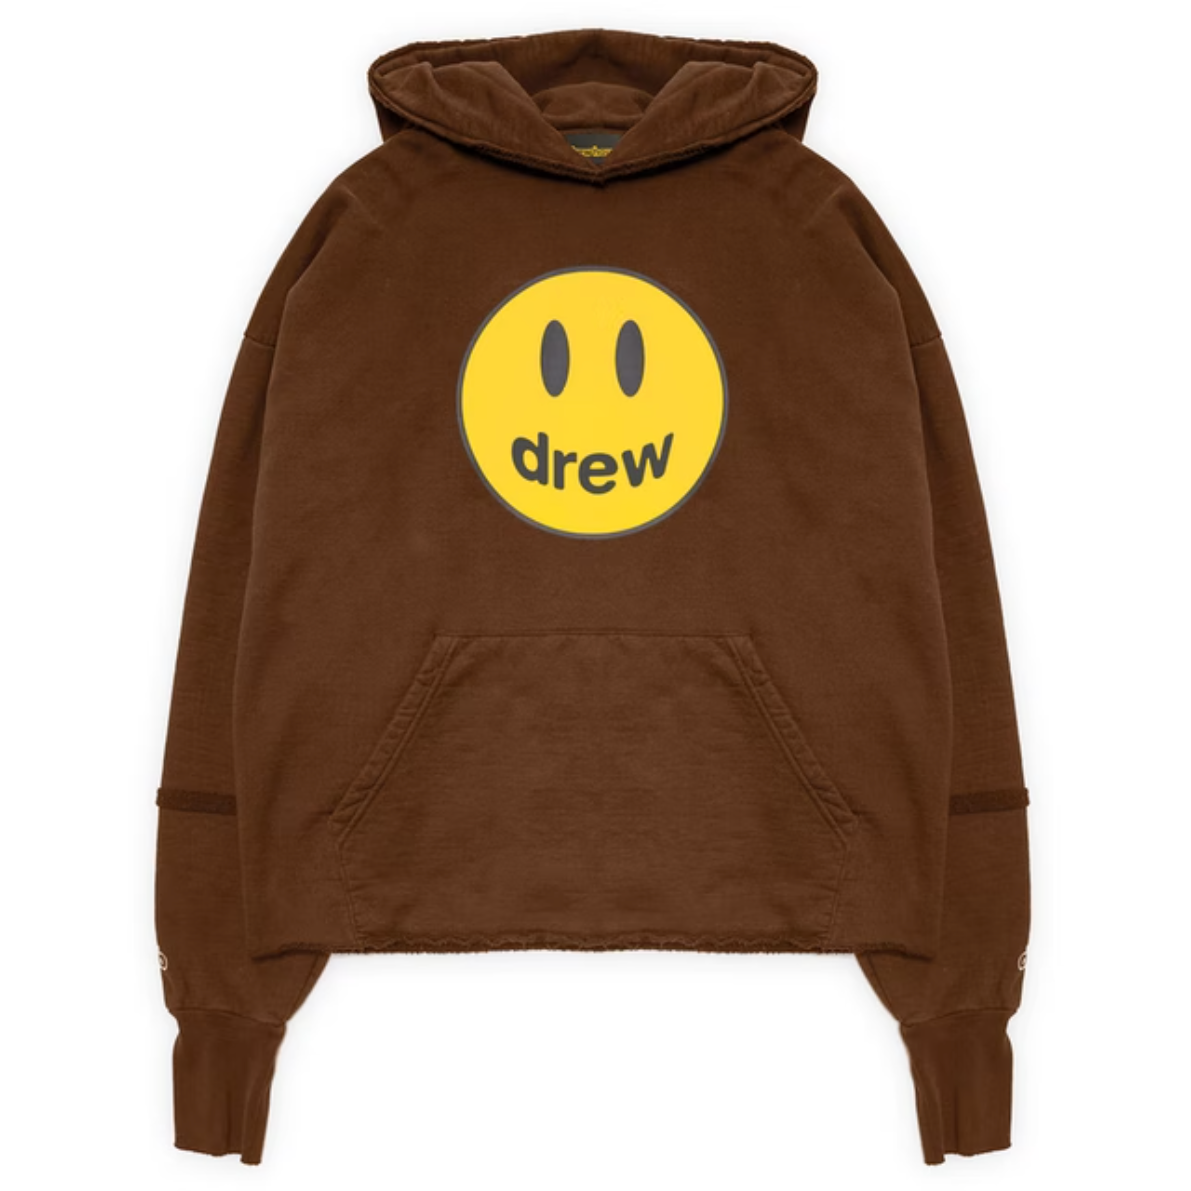 Drew house mascot deconstructed hoodie brown by Drew House from £162.99